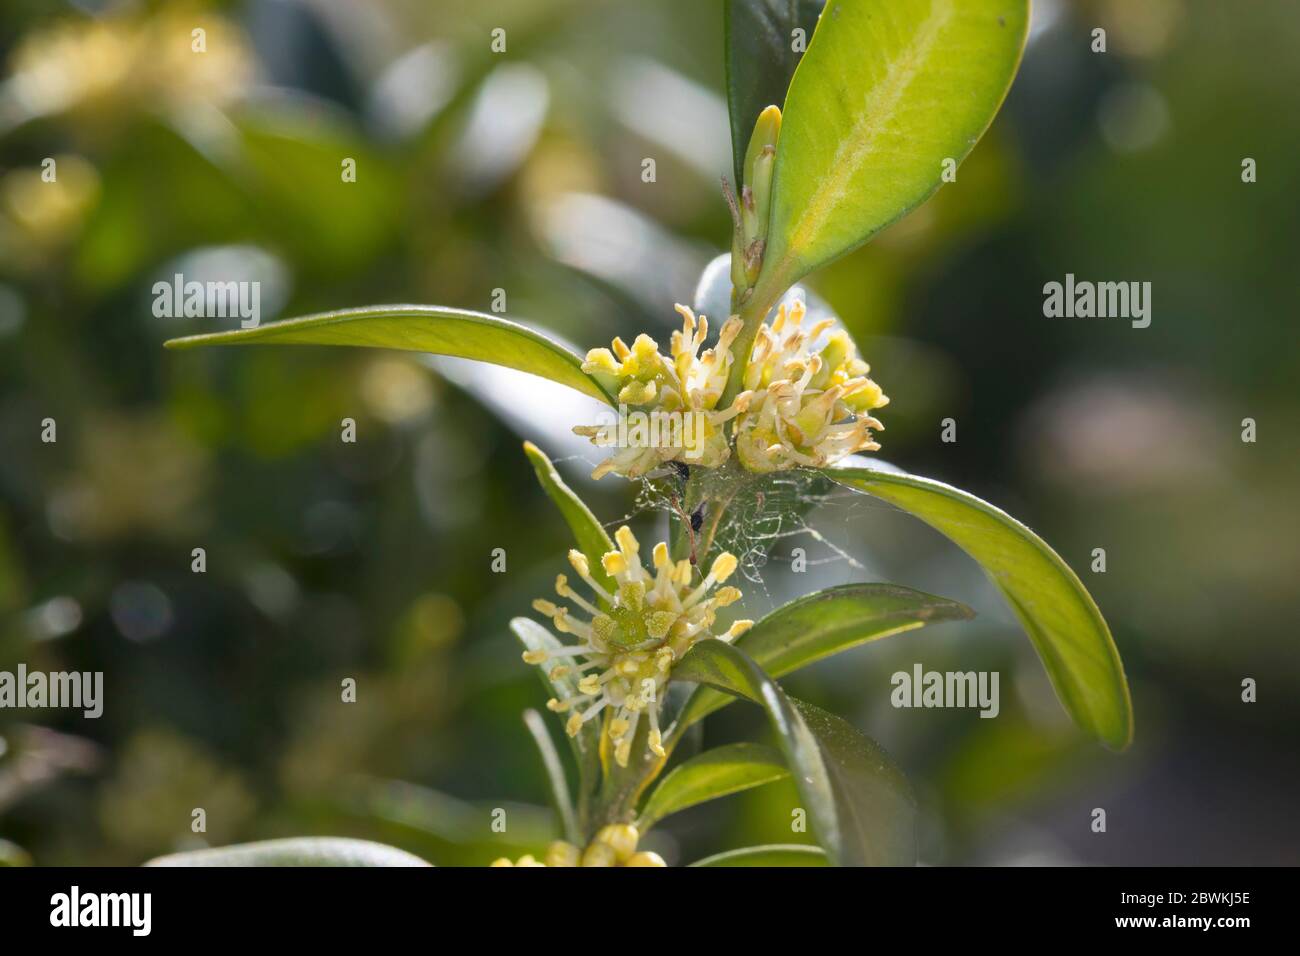 Common box, Boxwood (Buxus sempervirens), blooming, Germany Stock Photo